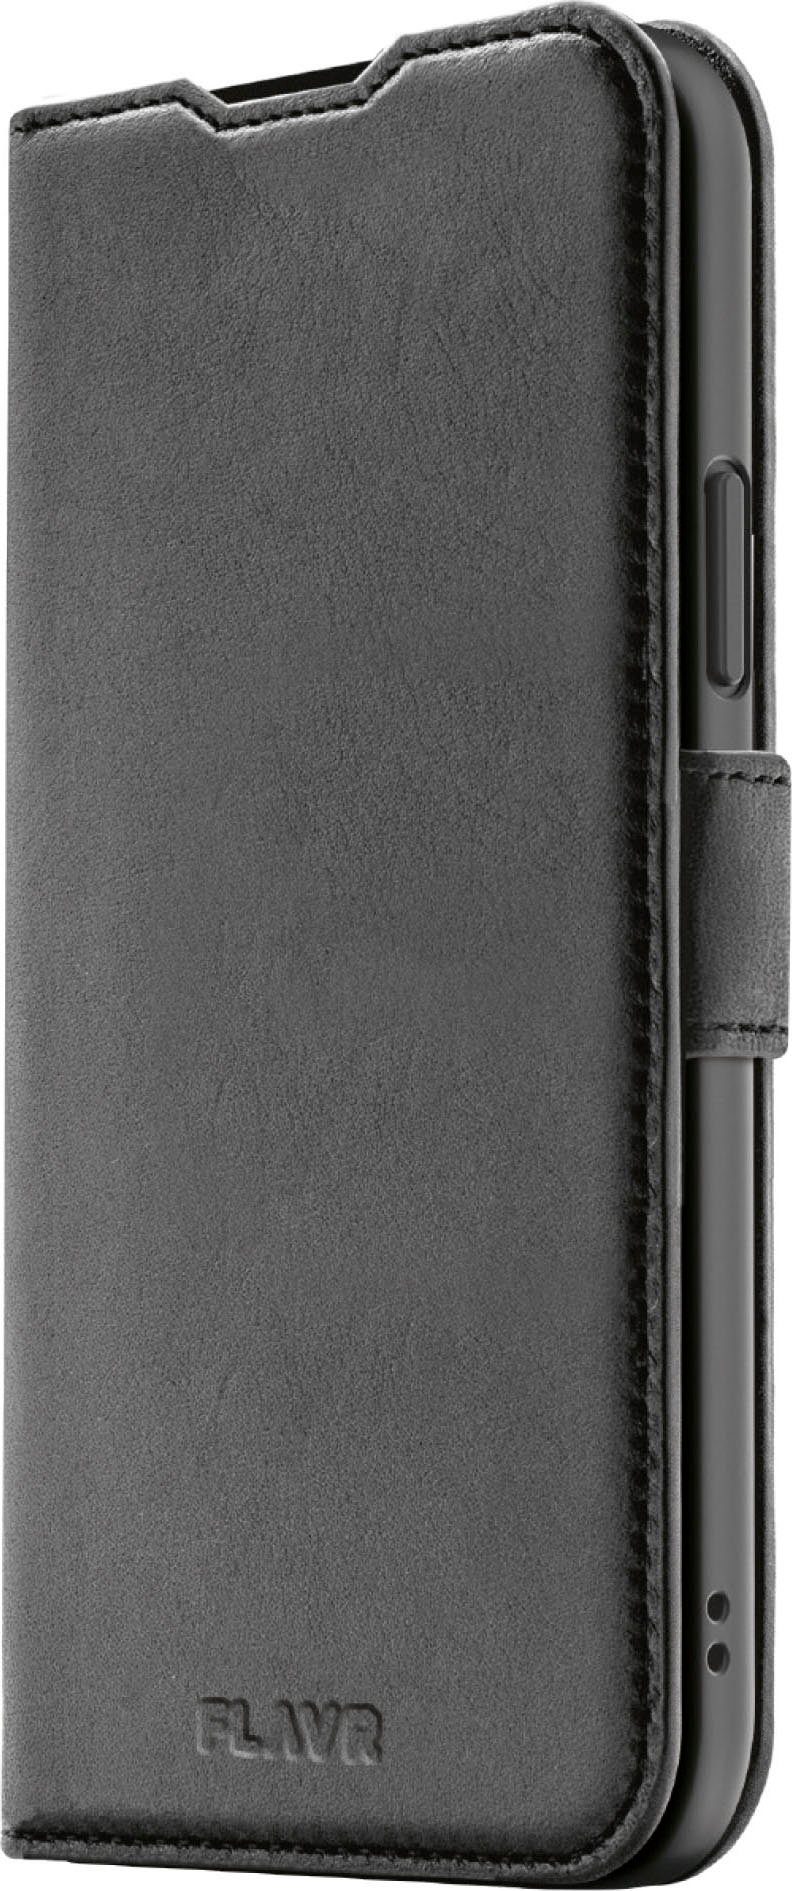 adidas Originals FLAVR Backcover Wallet Leather Recycled Case